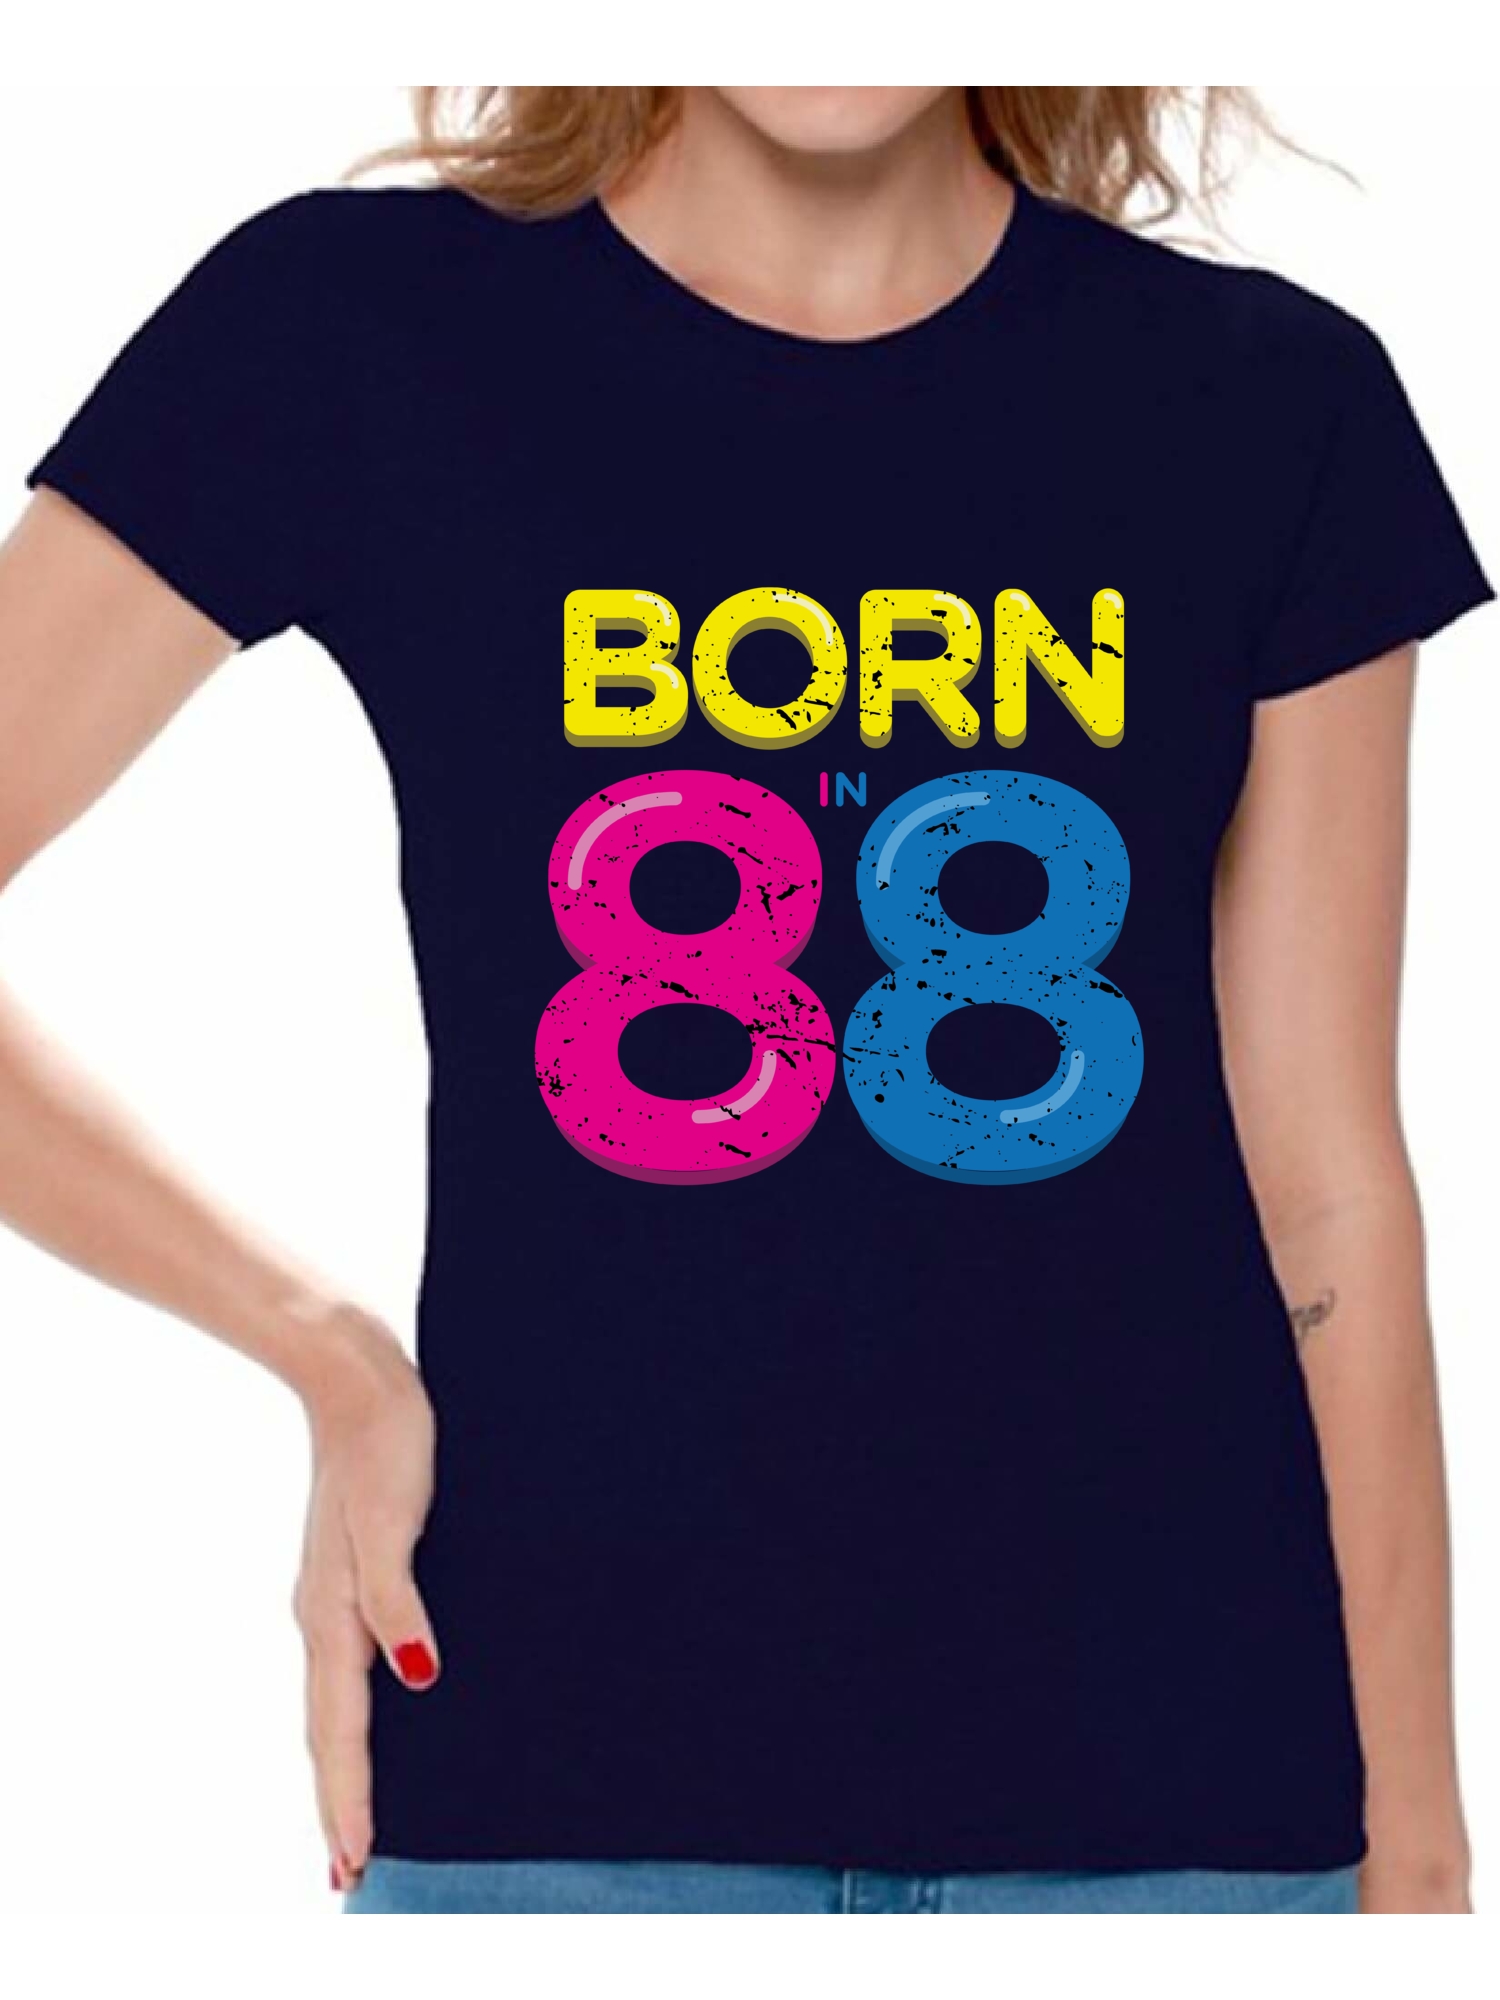 Awkward Styles Born In 88 Tshirt 30th Birthday Party Outfit for Women Funny Thirty Shirts Womens 30th Tshirt B-Day Party 88 T-Shirt Born in 1988 Funny Birthday Shirts for Women 30th Birthday Shirt - image 1 of 4